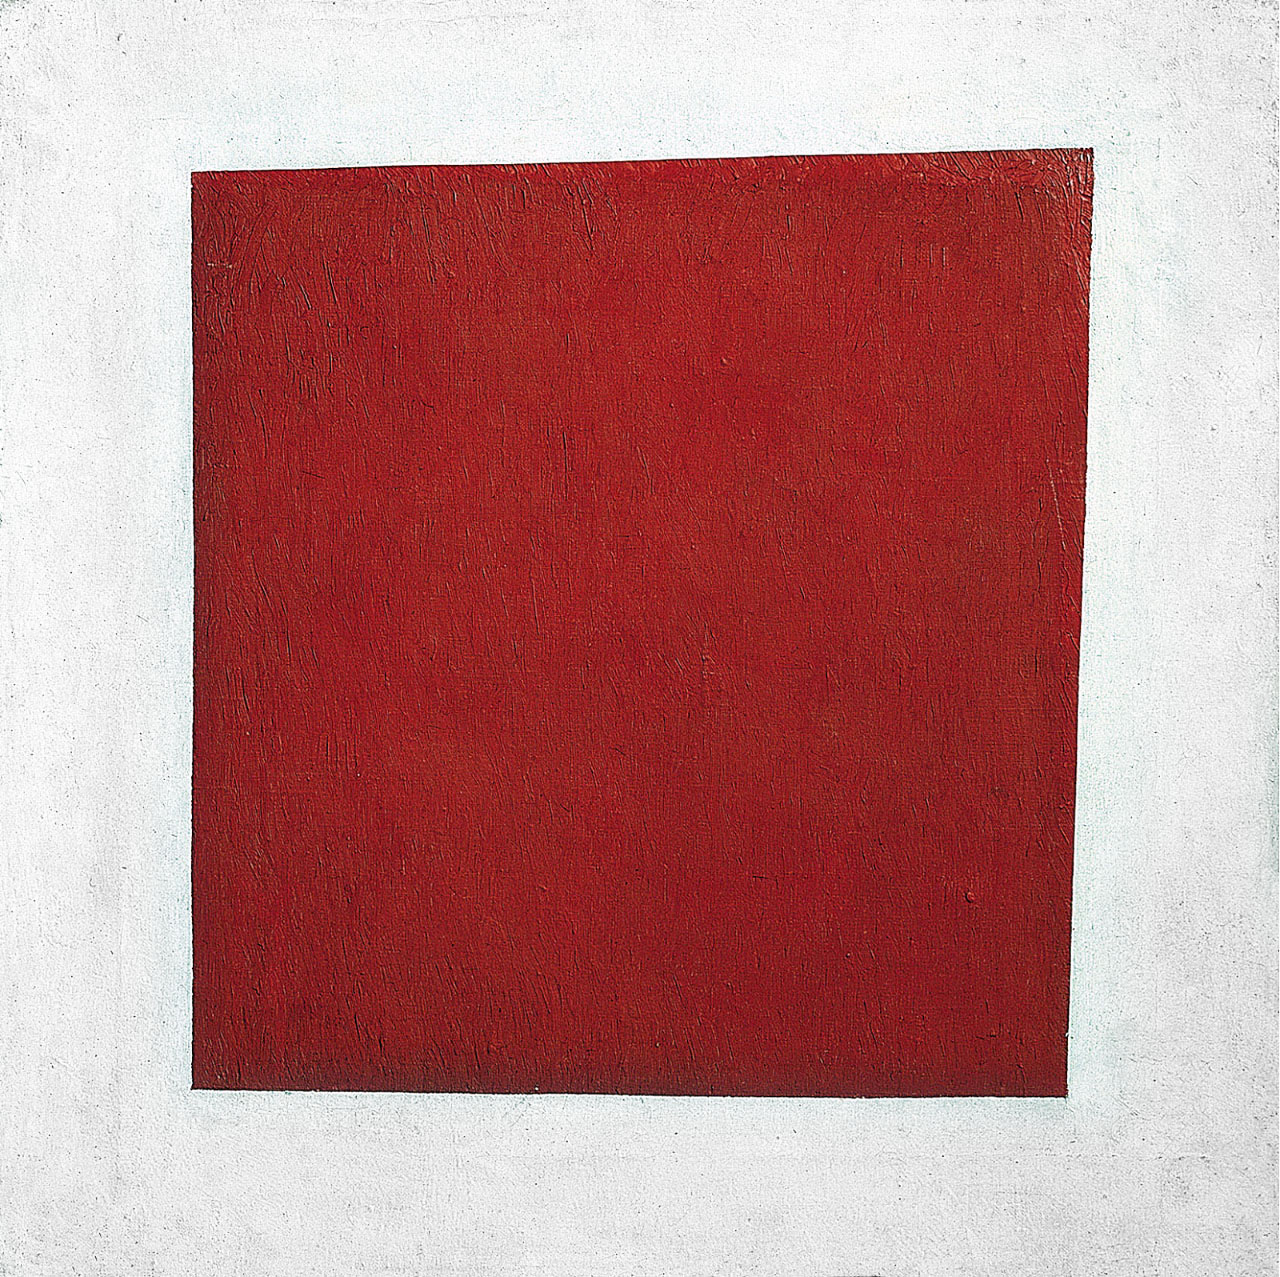 Malevich+Red+Square+1915?format=2500w